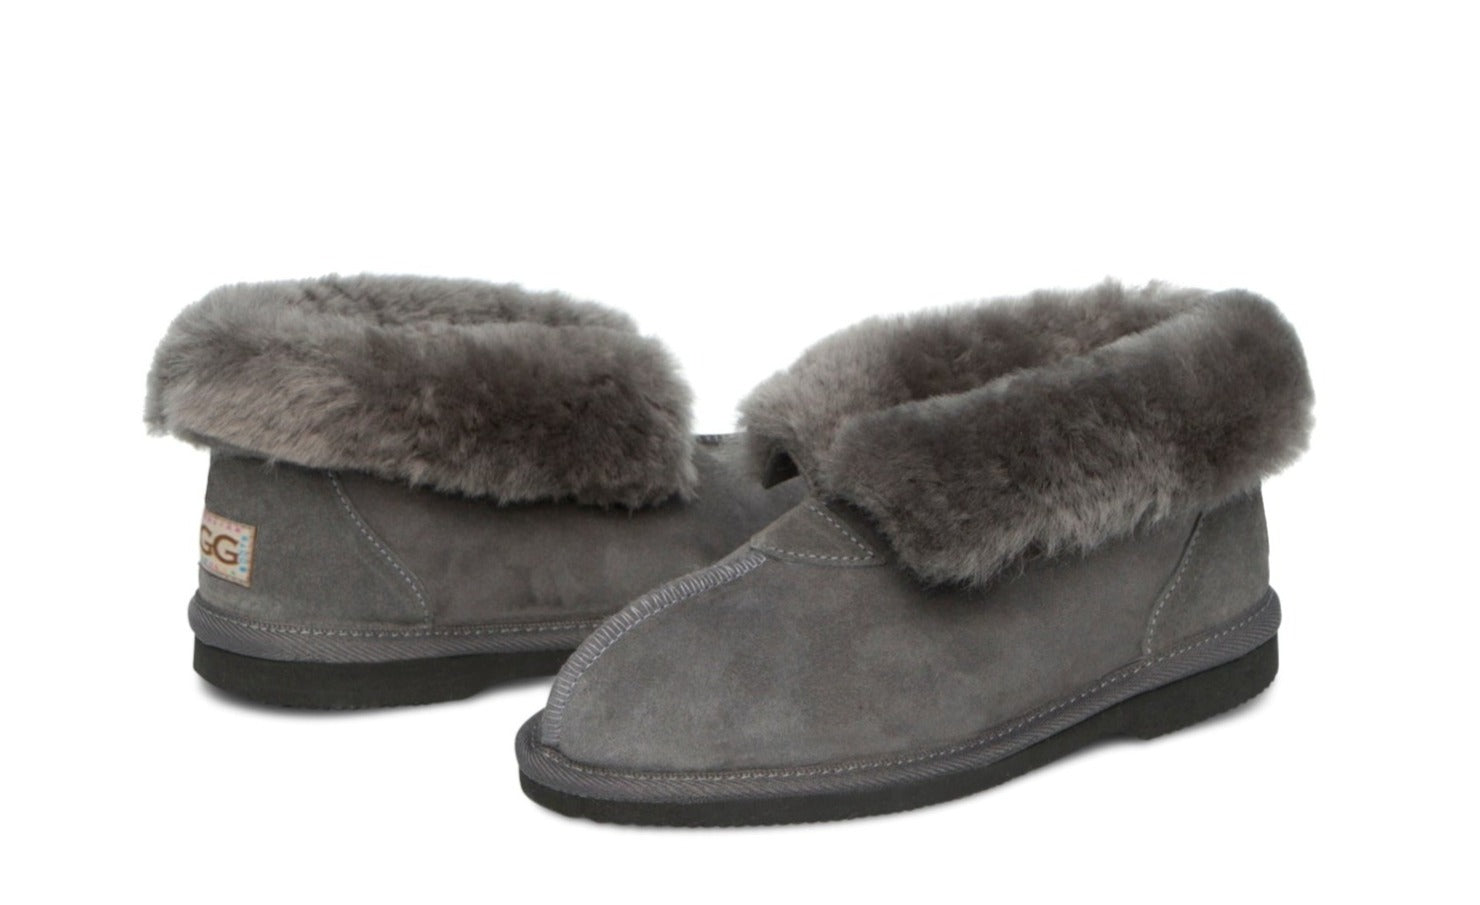 Kid's Ugg Slippers, with sheepskin rolled out at the top in grey